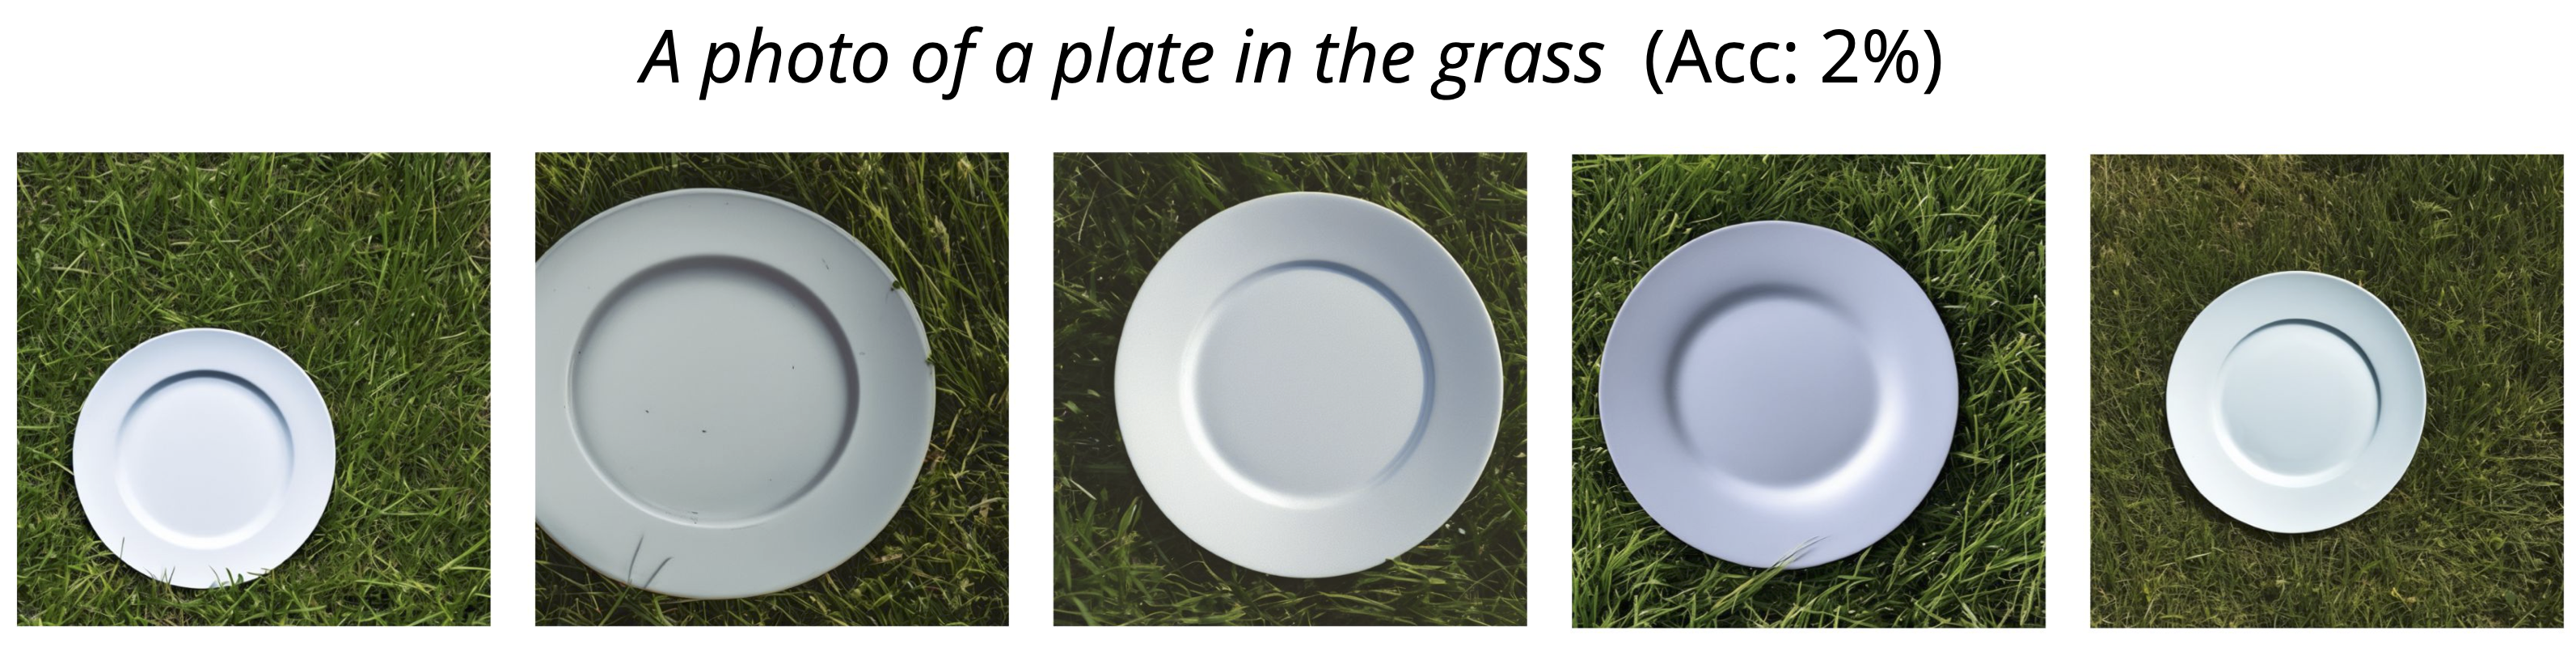 plates in the grass SD